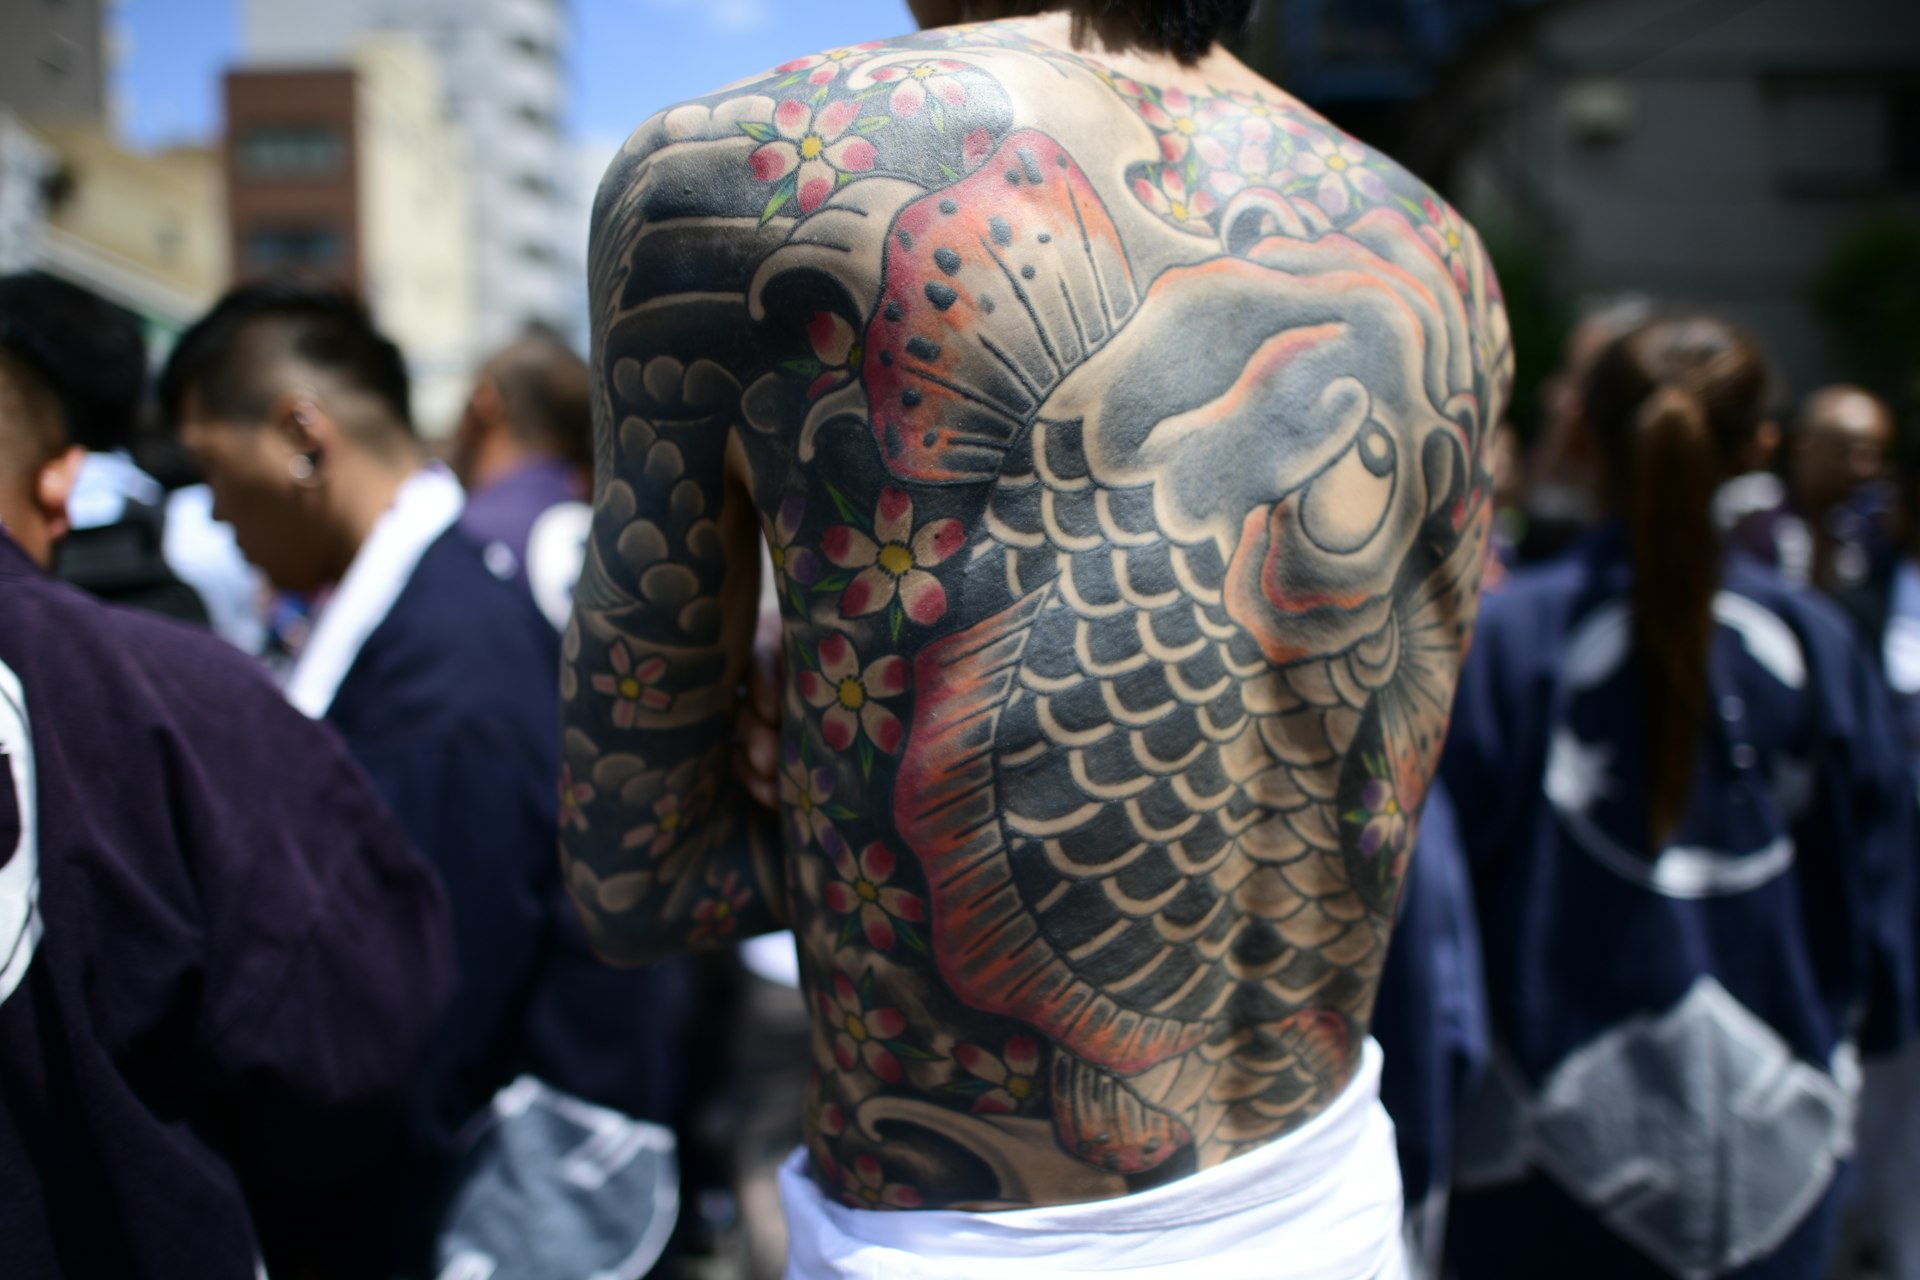 Closeup of a large Irezumi-style tattoo that covers the entire back of a man.